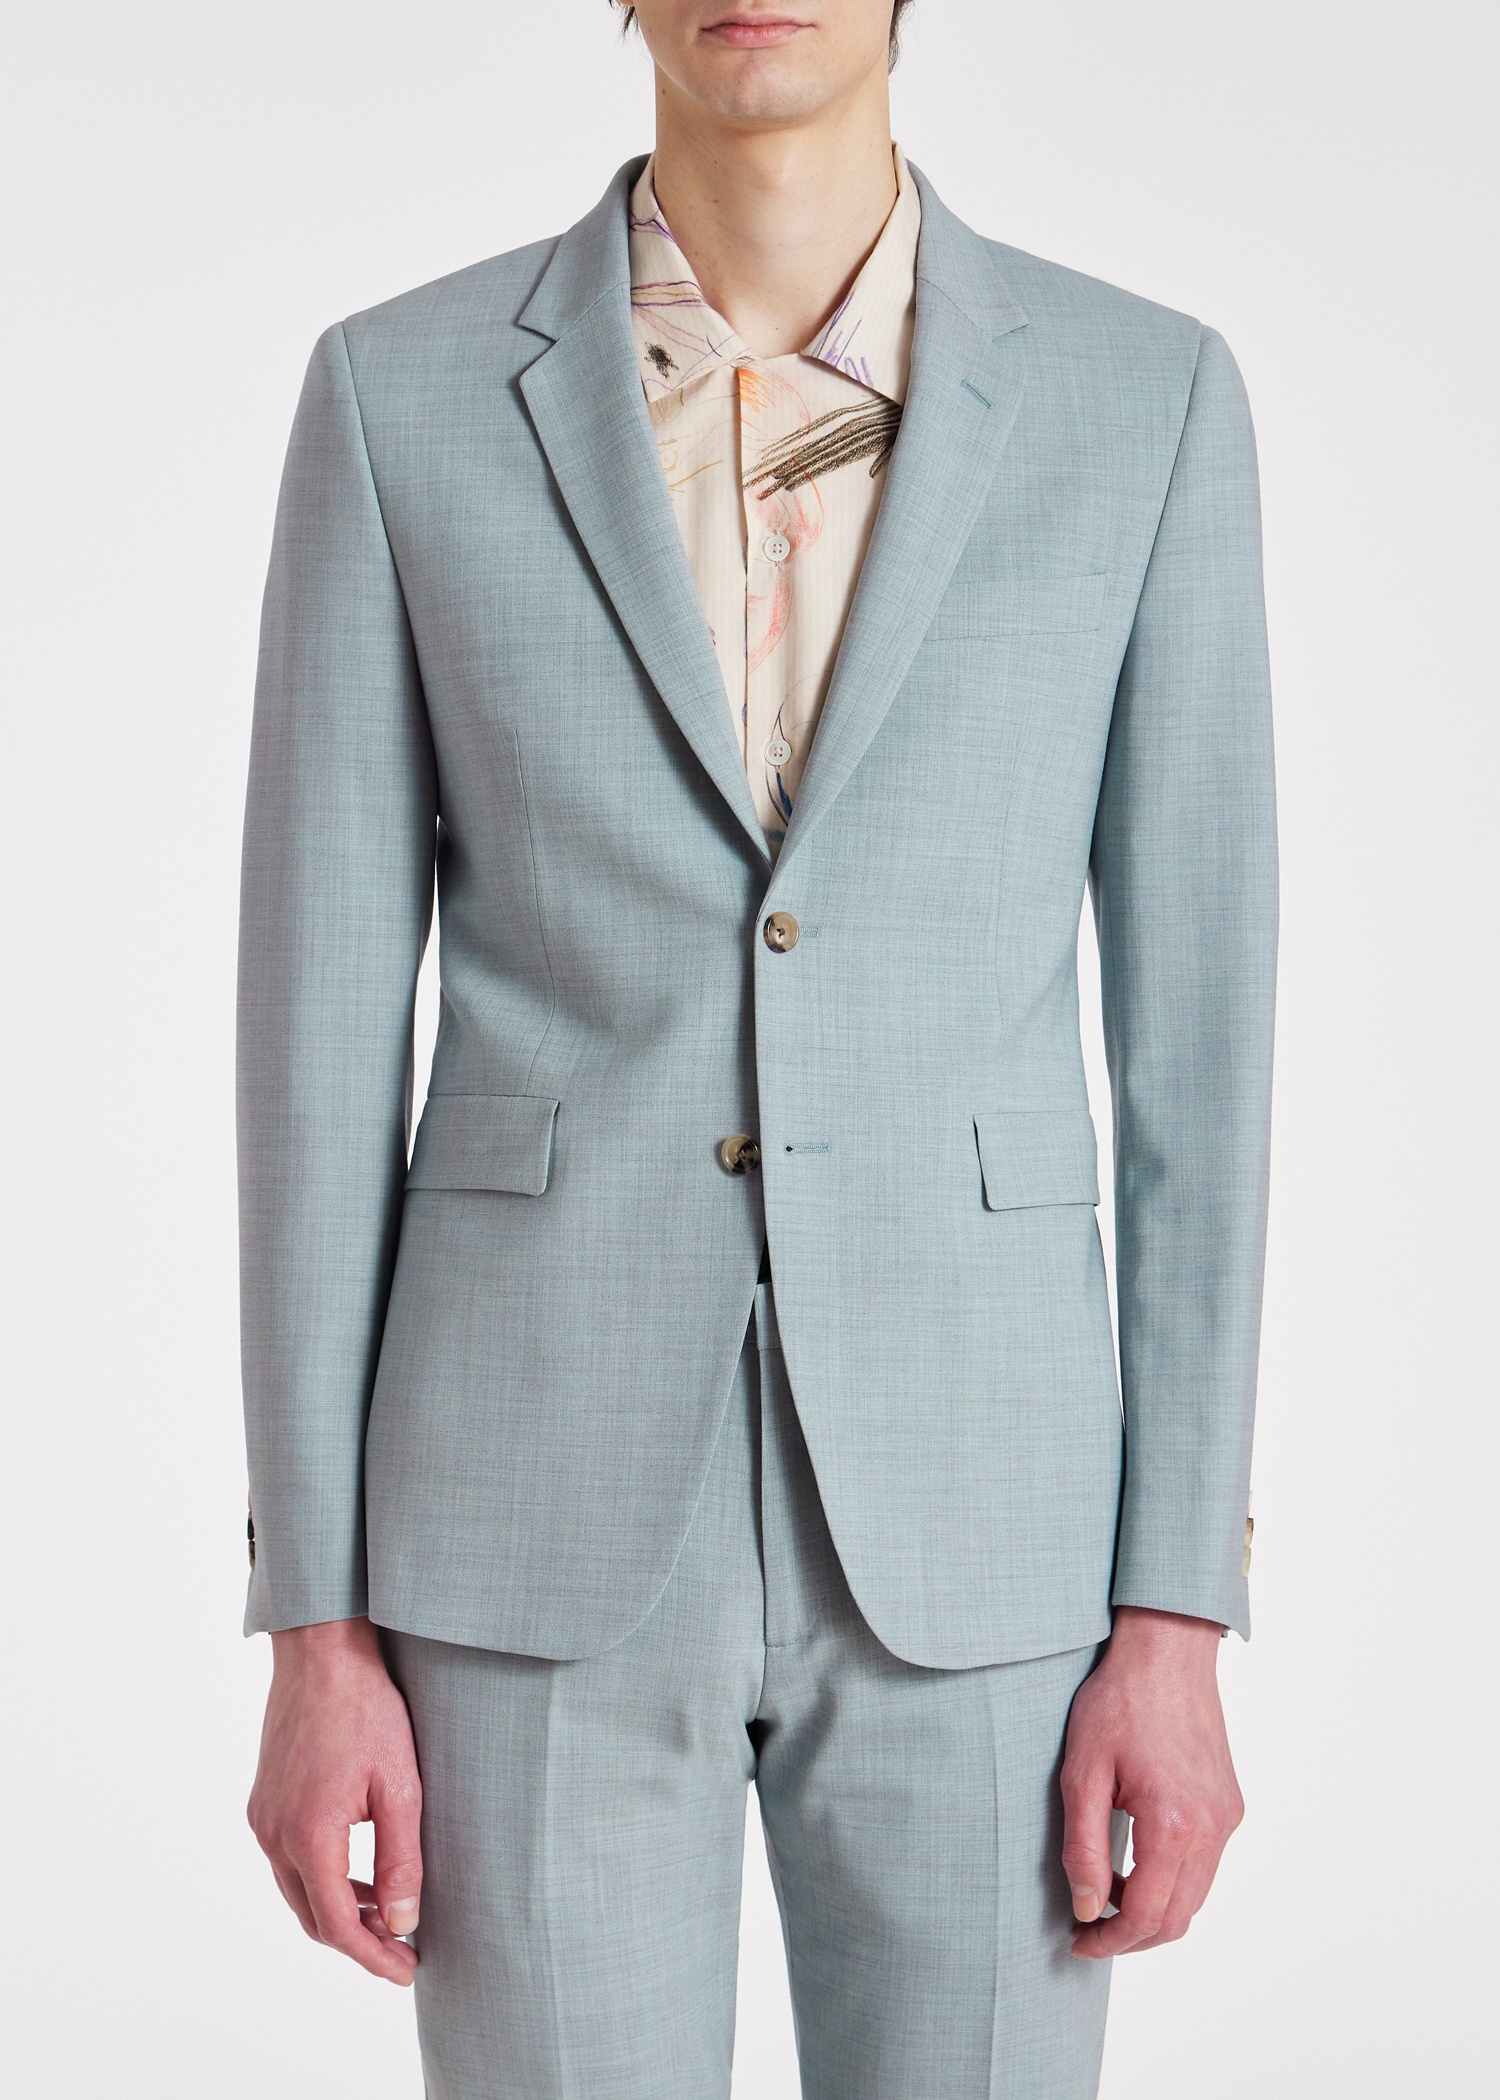 The Kensington - Light Blue Marl Overdyed Stretch-Wool Suit - 8